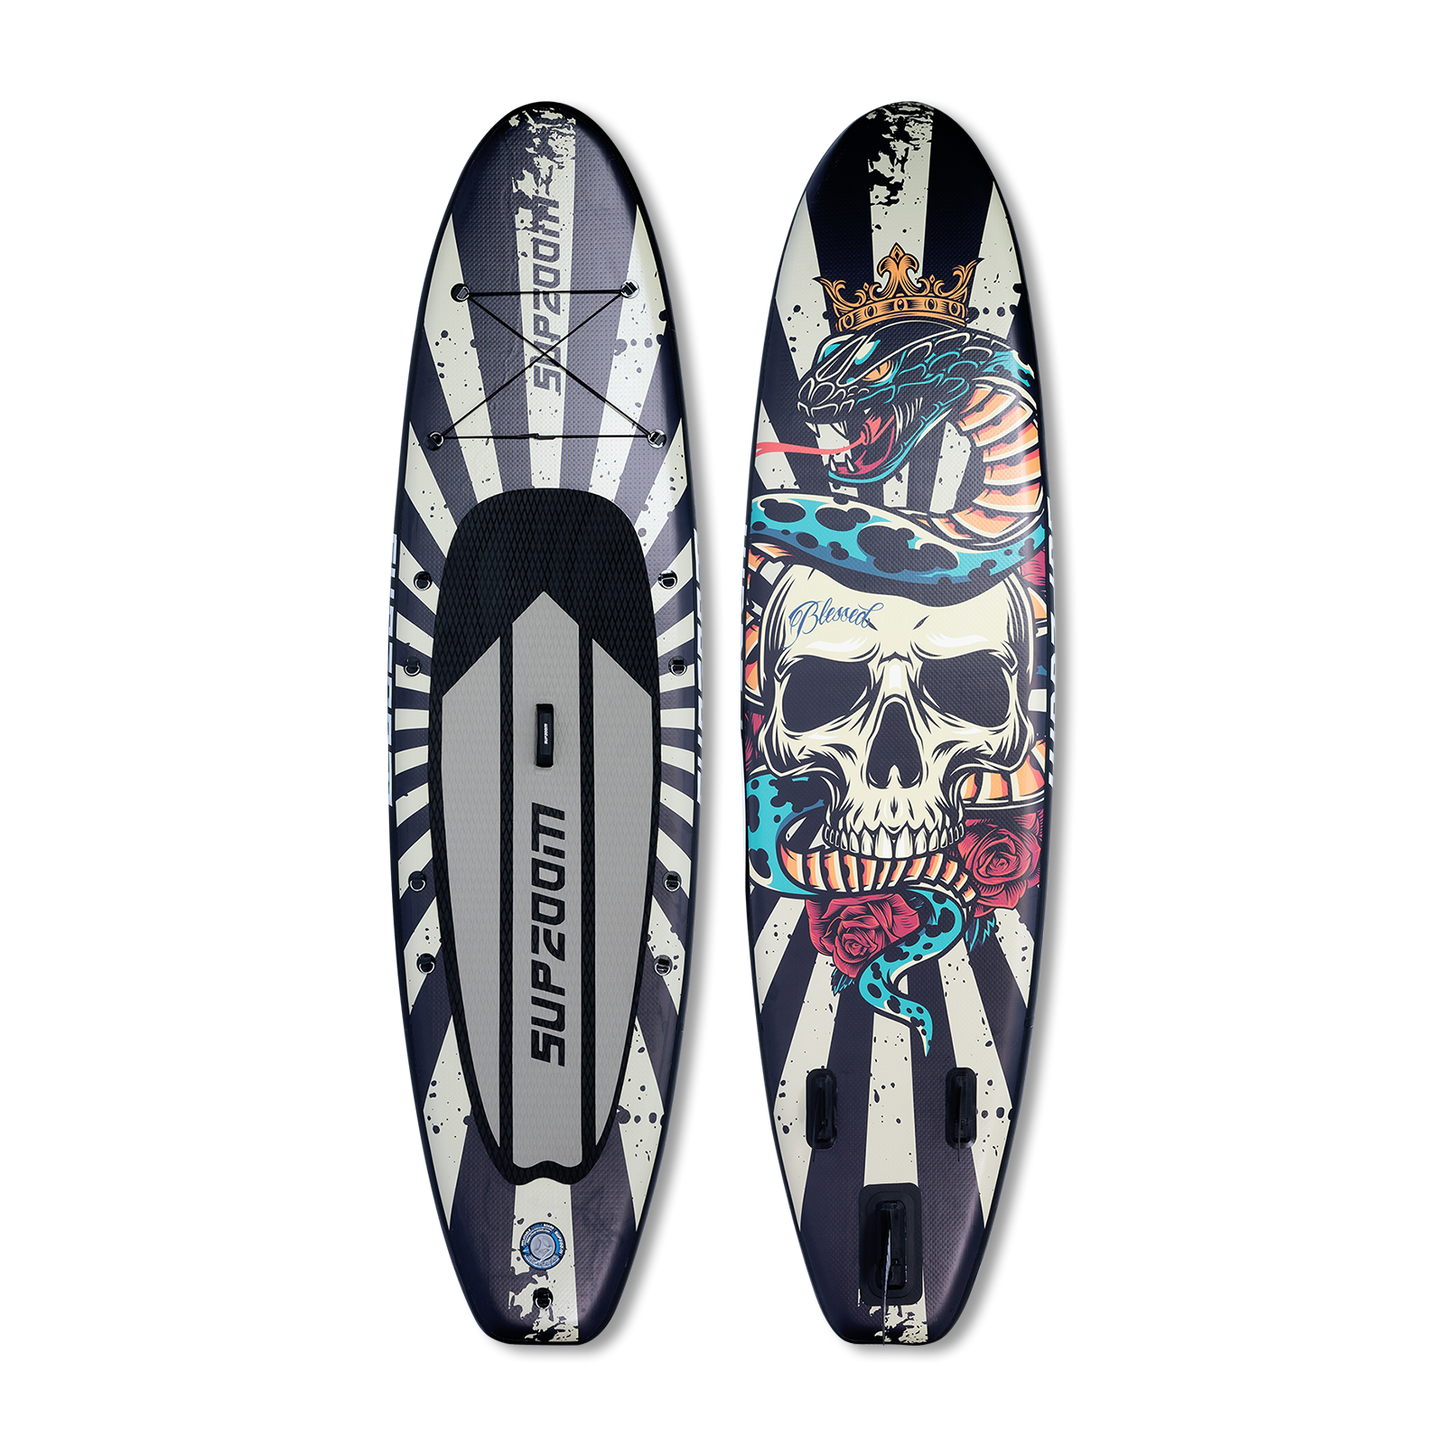 All round 10'6" skull style inflatable paddle board | Supzoom